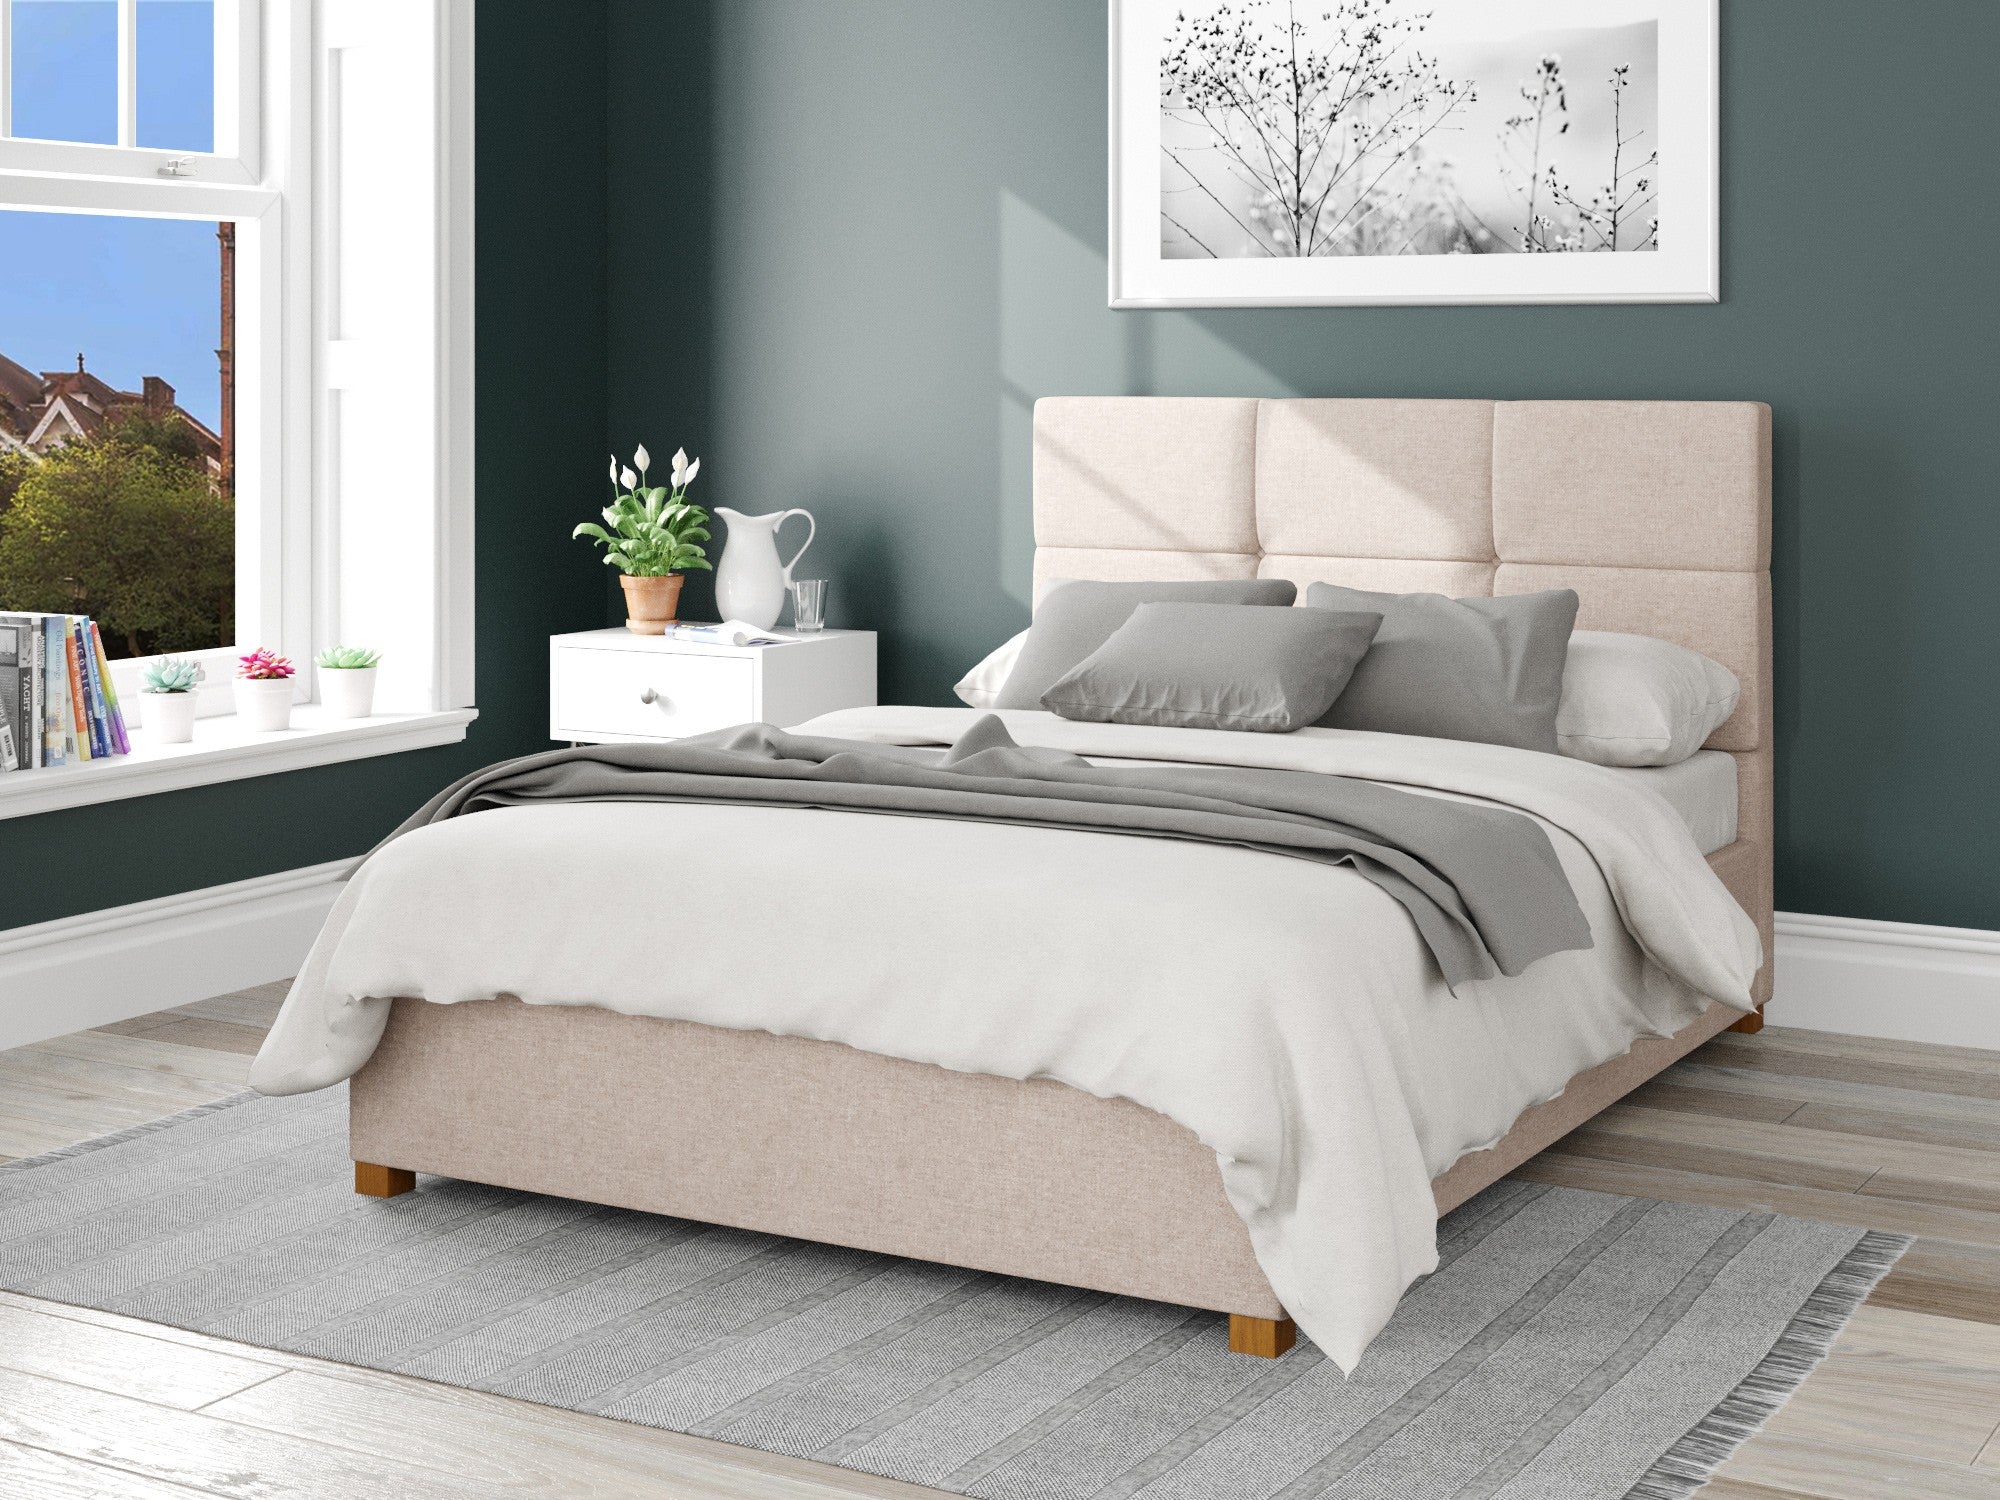 Caine Fabric Ottoman Bed - Saxon Twill - Natural